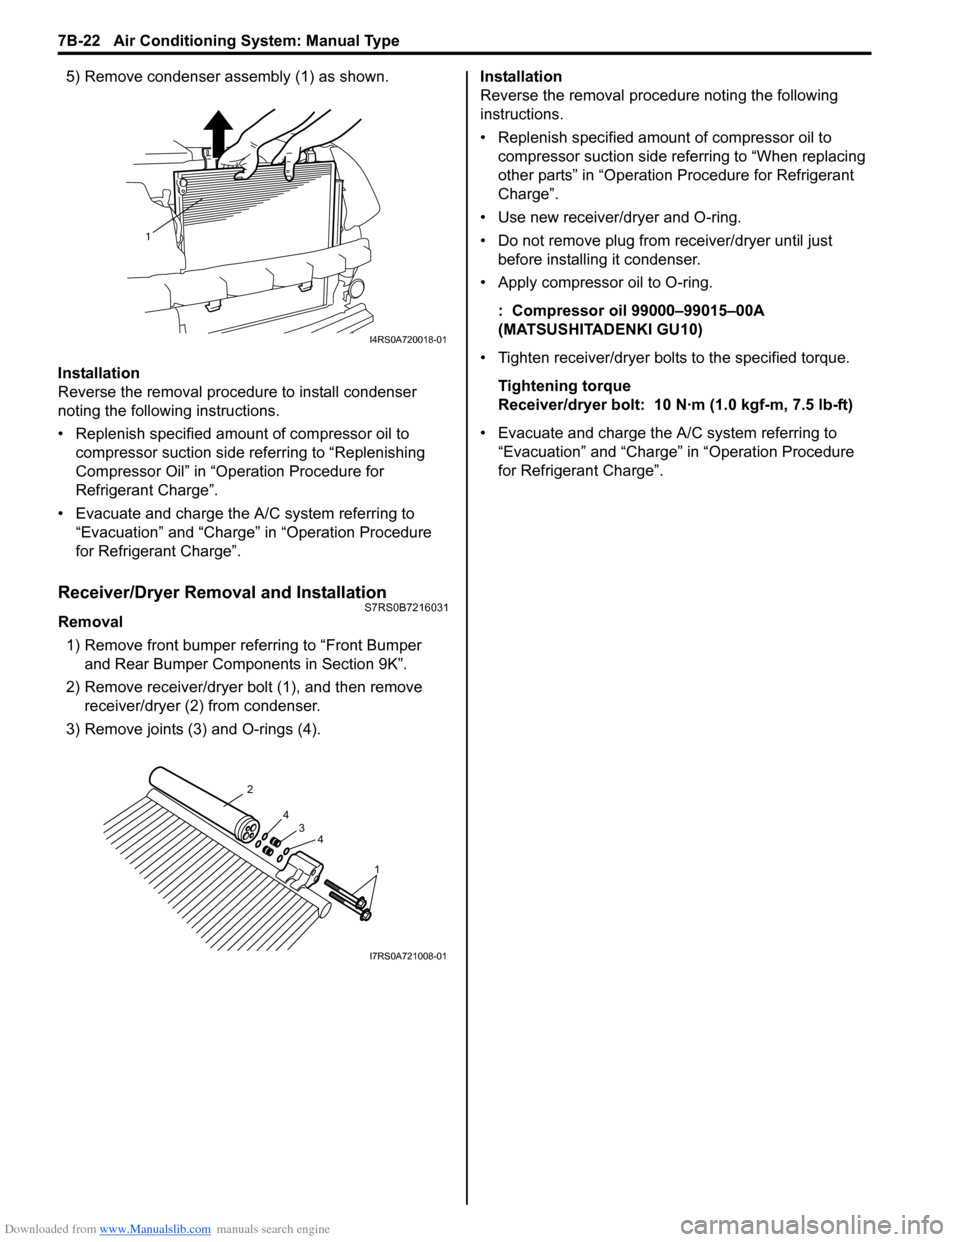 SUZUKI SWIFT 2008 2.G Service Workshop Manual Downloaded from www.Manualslib.com manuals search engine 7B-22 Air Conditioning System: Manual Type
5) Remove condenser assembly (1) as shown.
Installation
Reverse the removal procedure to install con